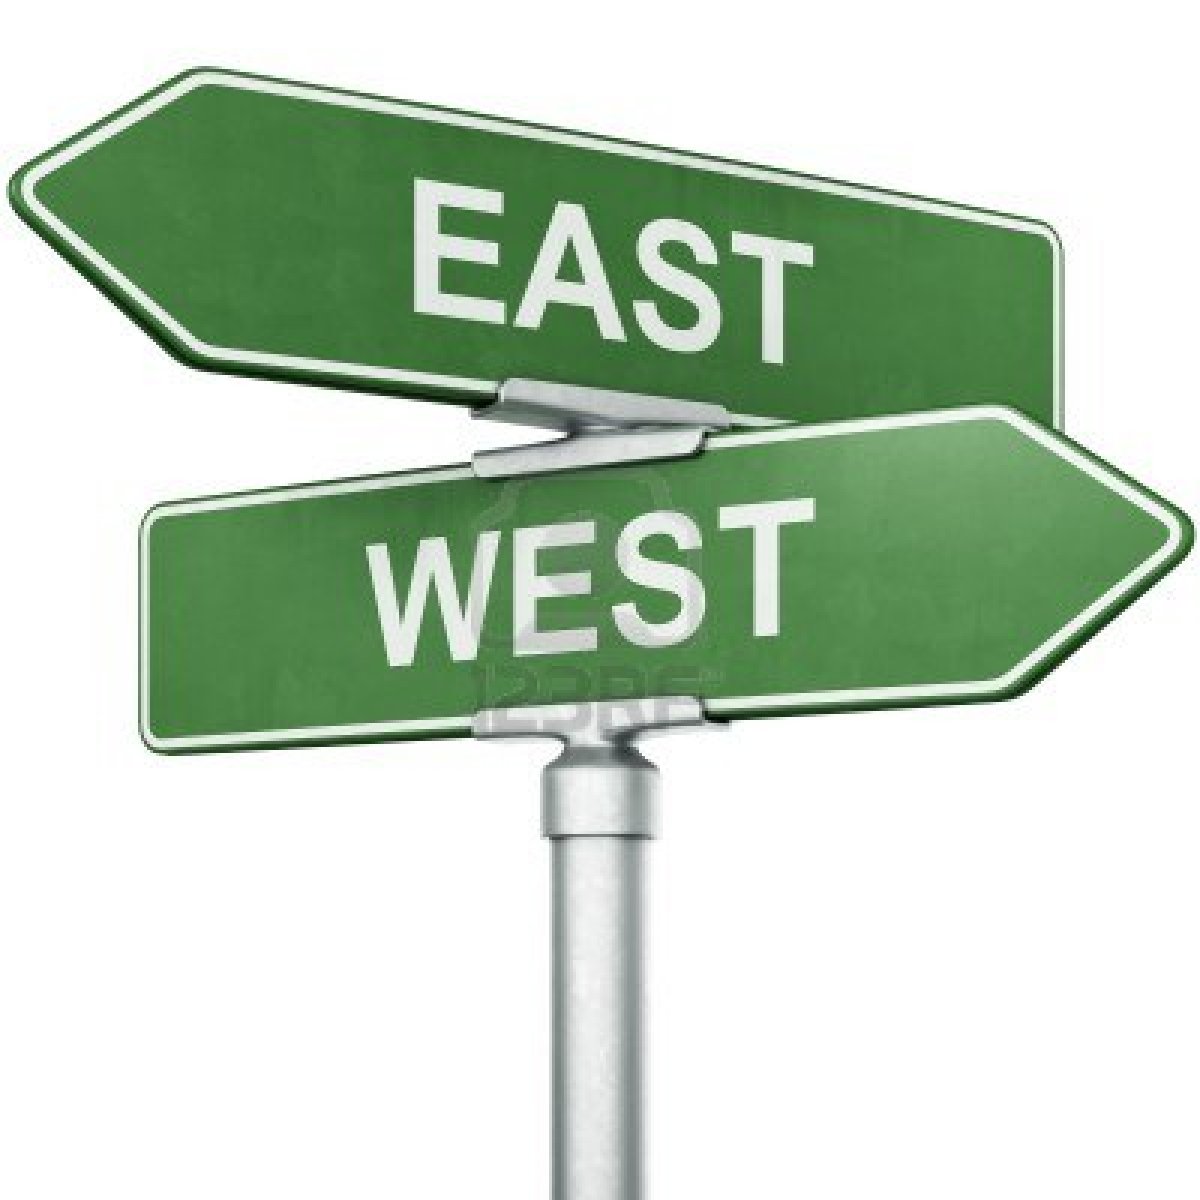 East West Bank - Personal Banking, Business Loans, and